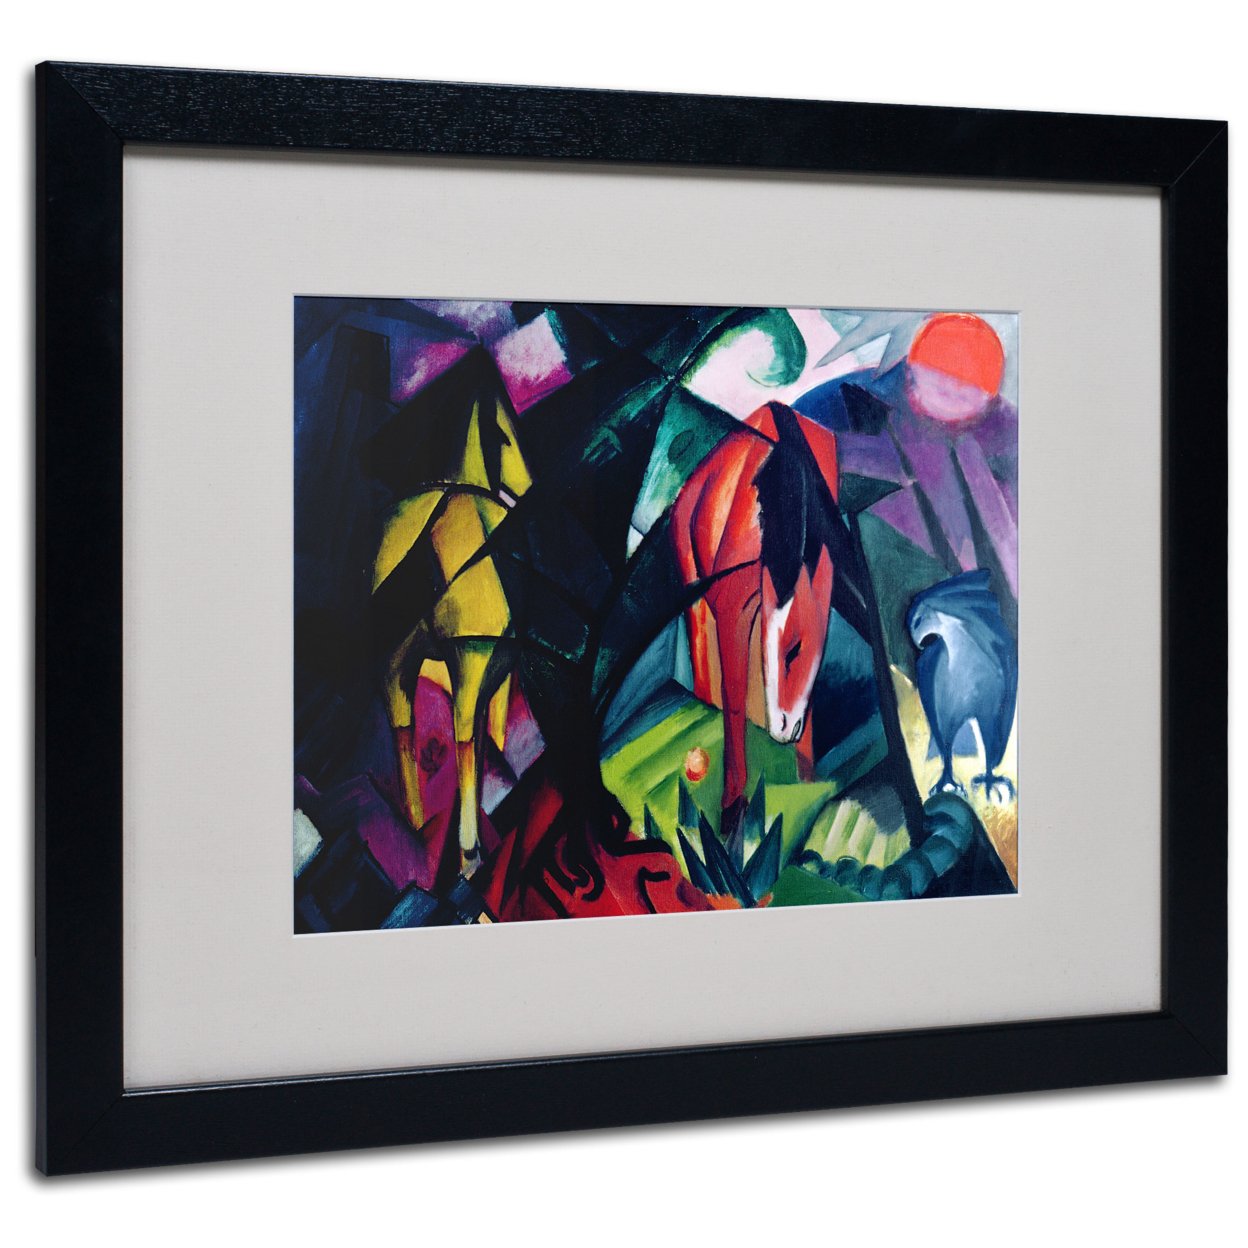 Franz Marc 'Horse And Eagle 1912' Black Wooden Framed Art 18 X 22 Inches